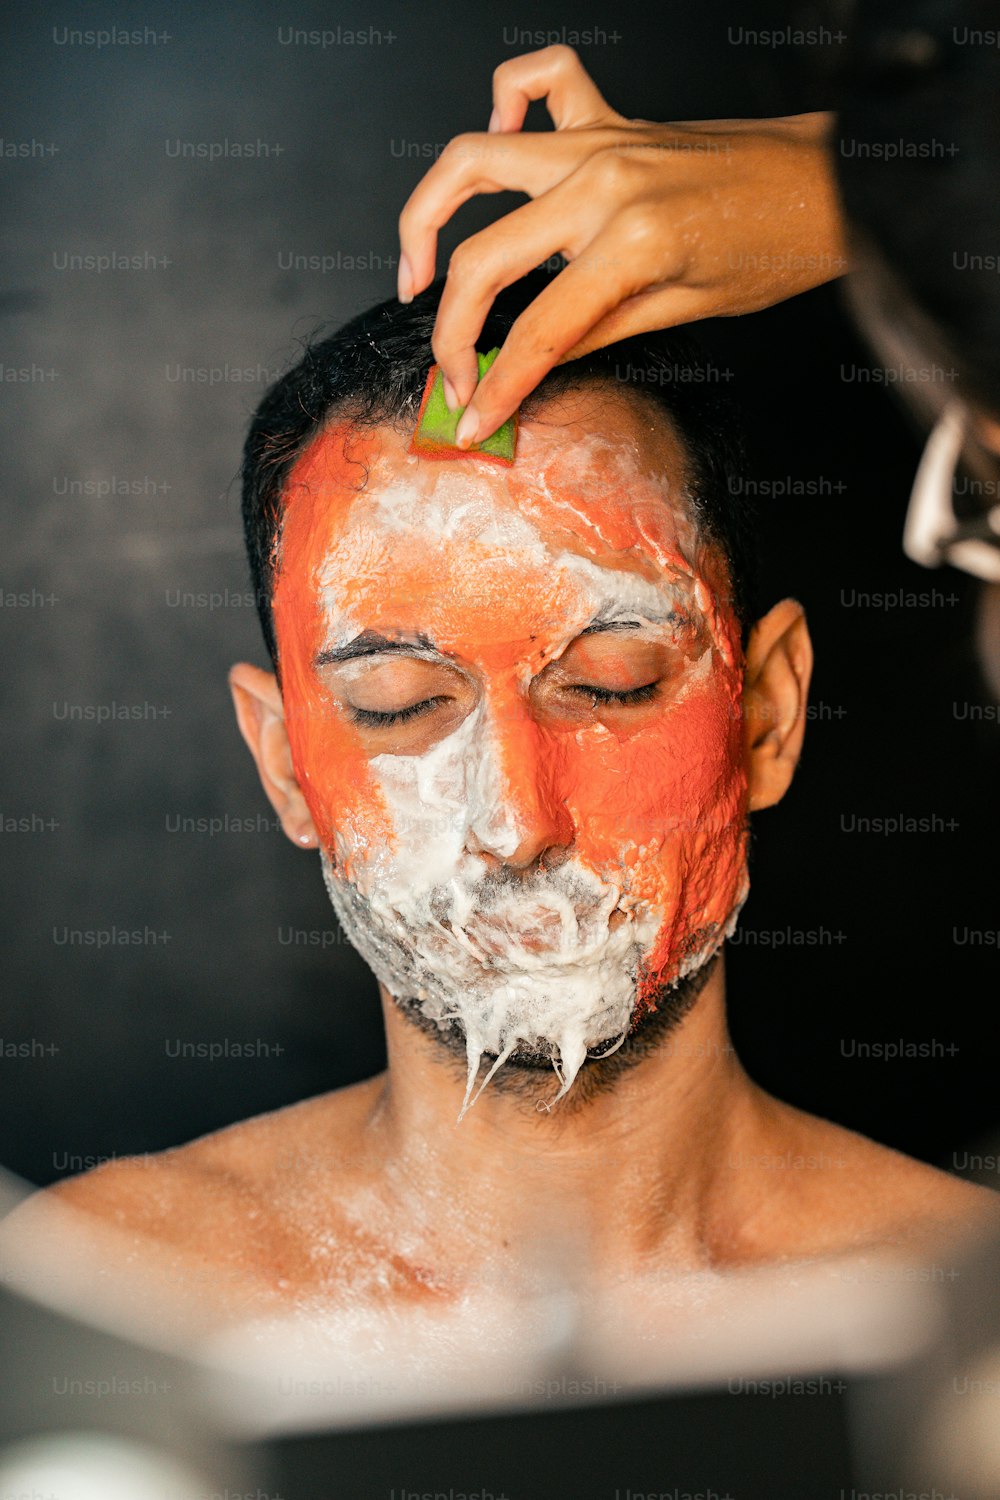 a man getting his face painted orange and white